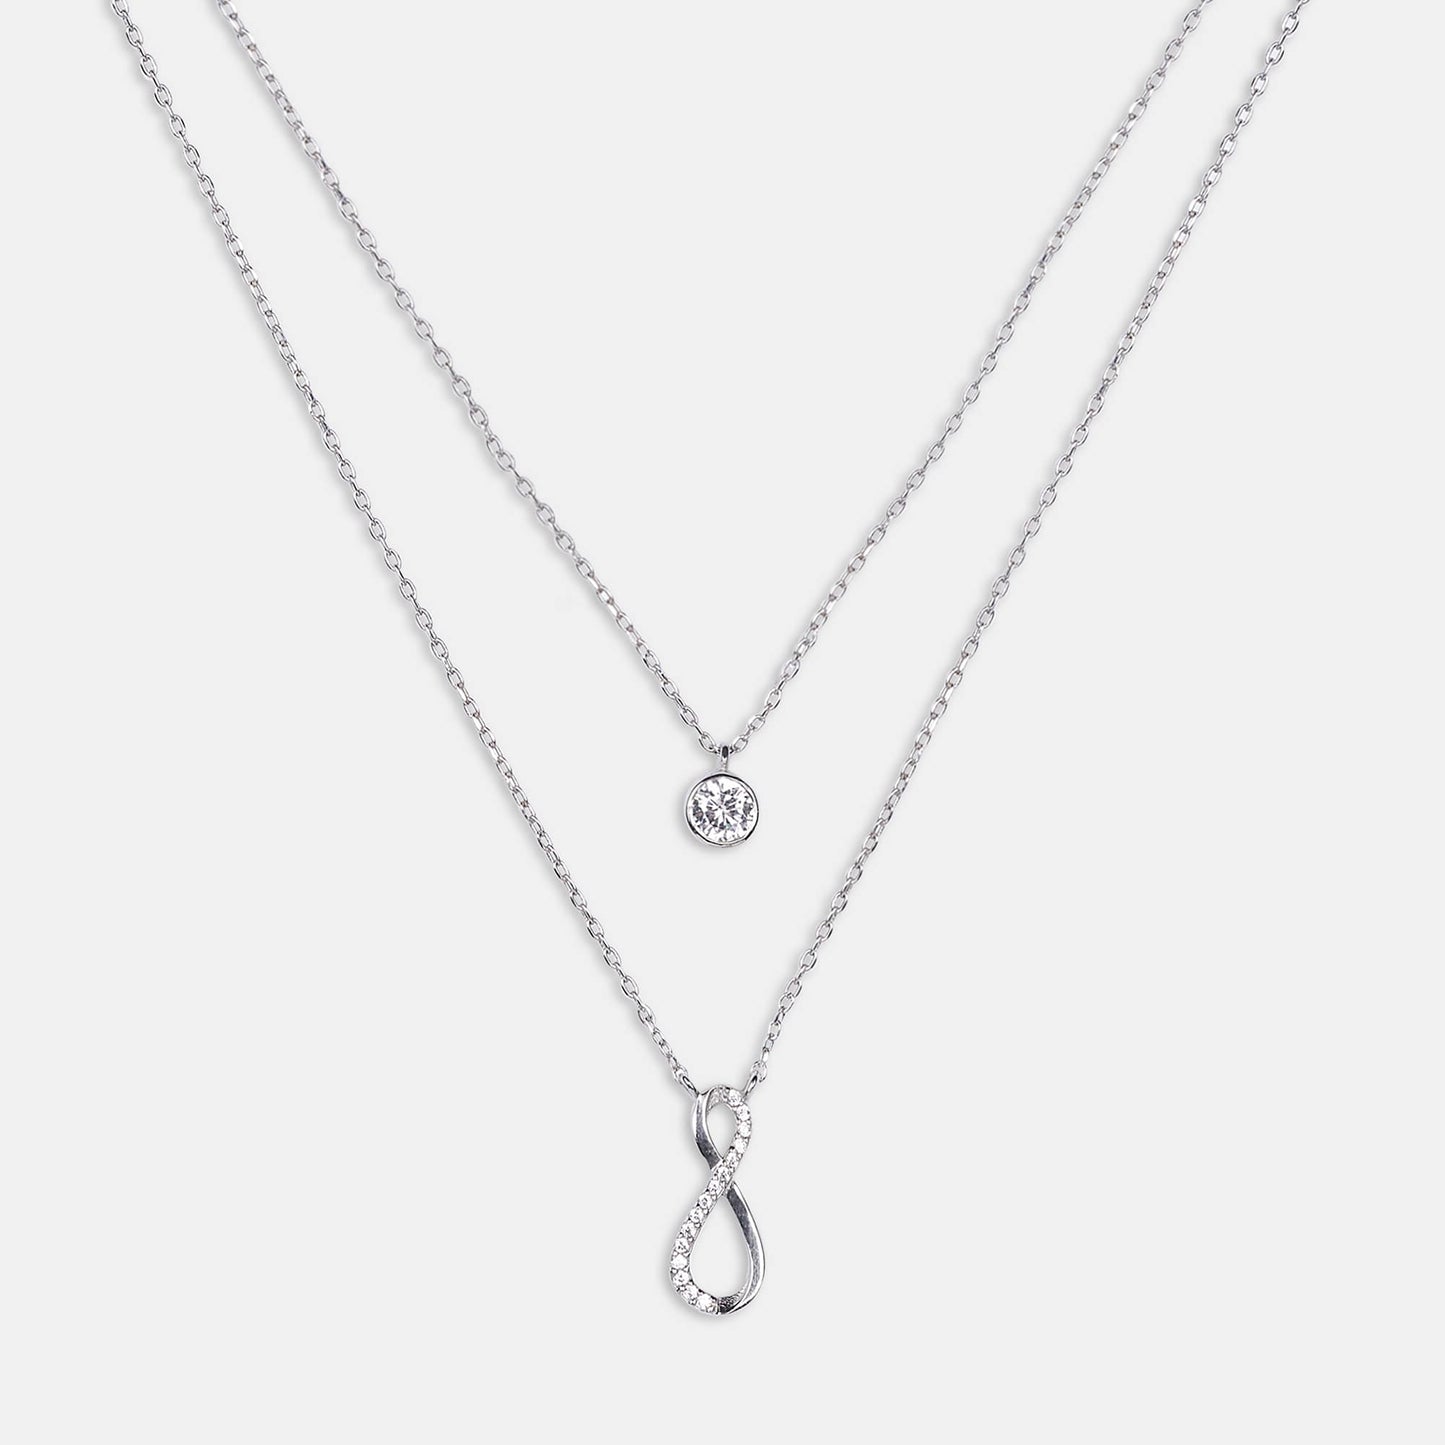 A stunning sterling silver necklace infinity symbol, symbolizing eternal love and beauty